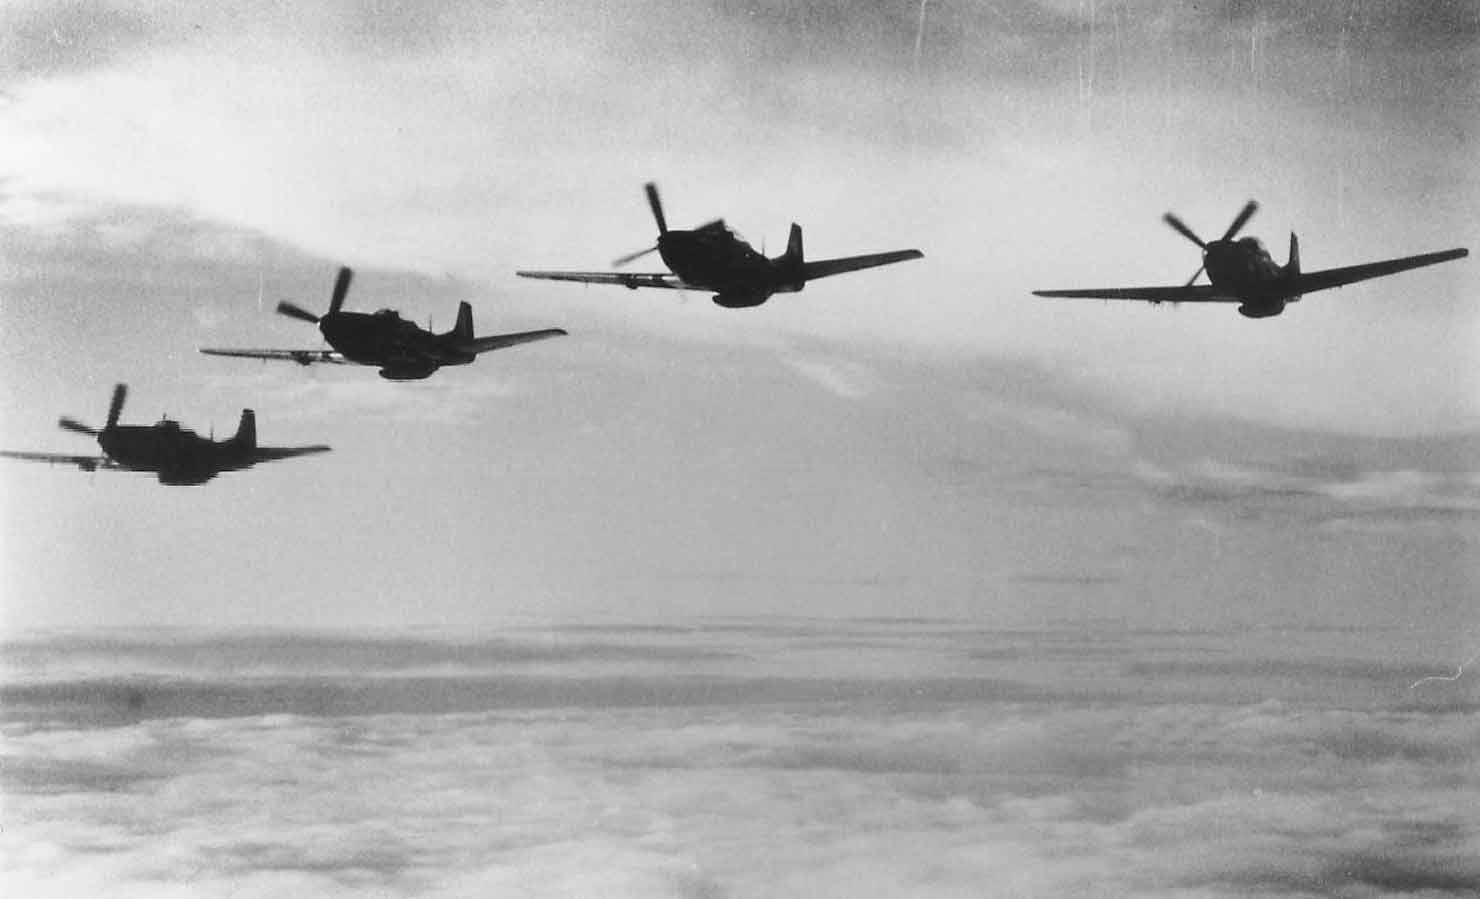 http://ww2today.com/wp-content/uploads/2014/10/Silhouettes-of-P-51s-in-flight.jpg